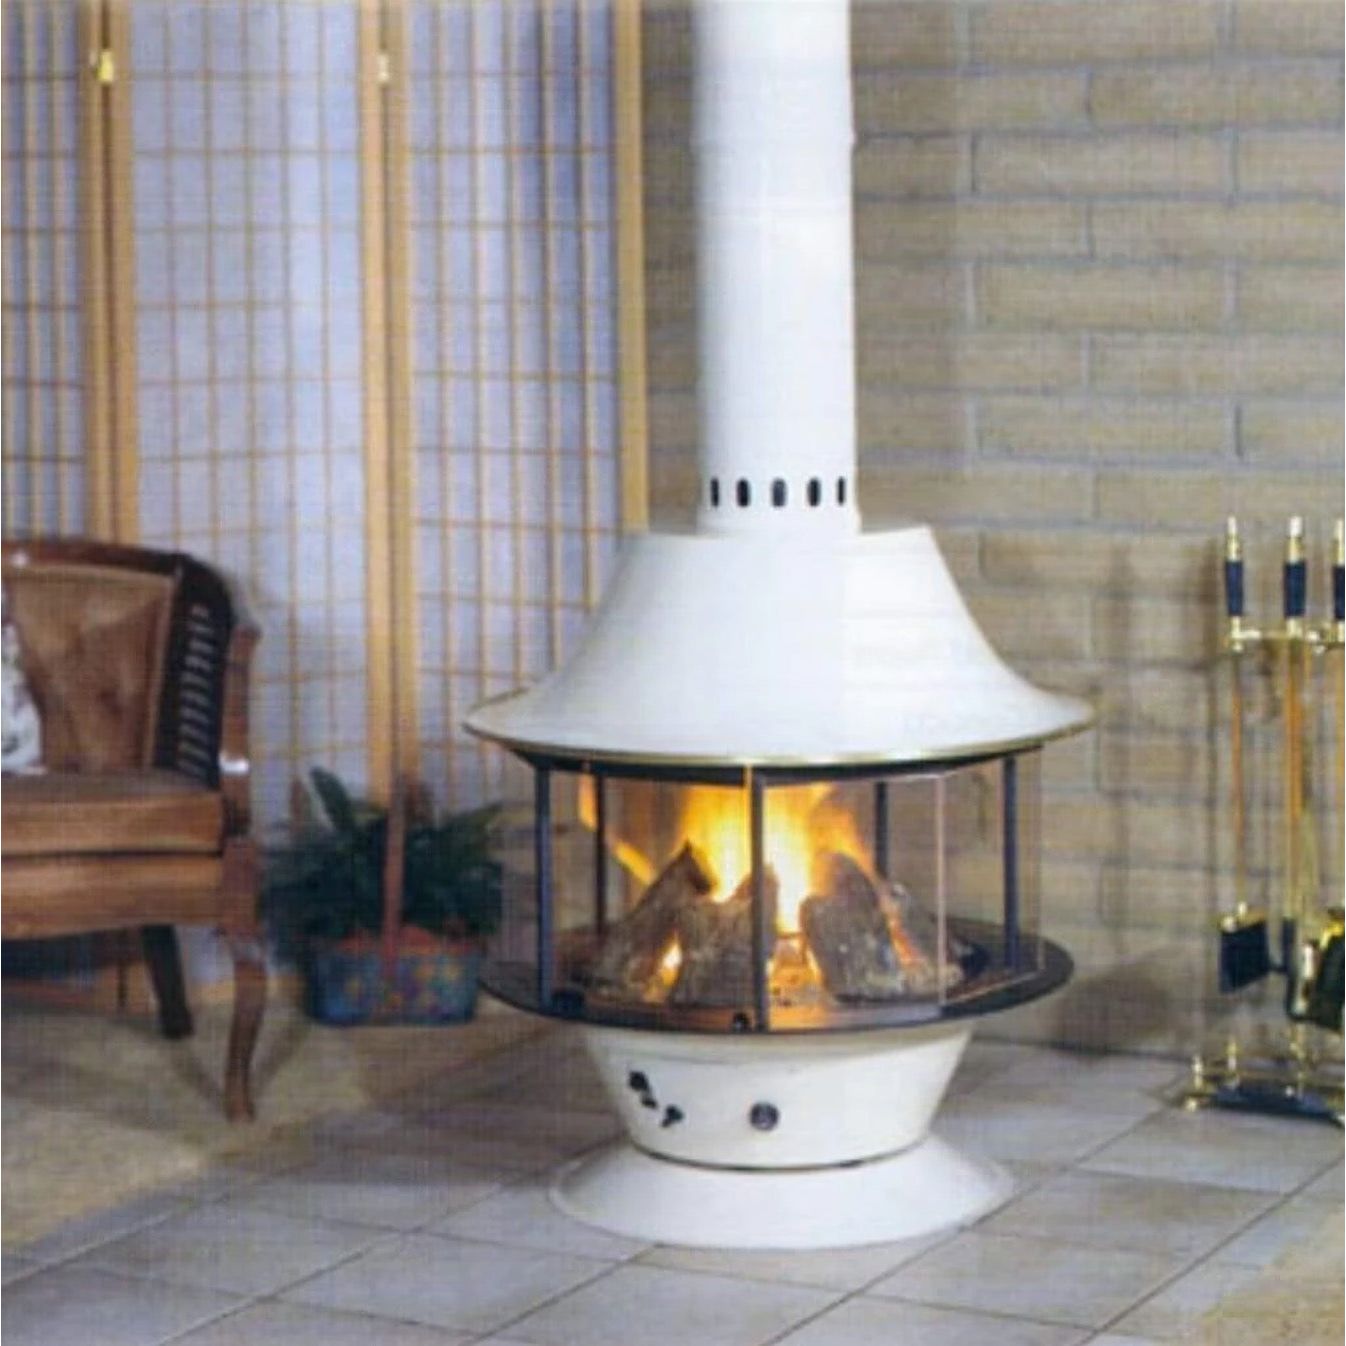 Malm Spin-A-Fire 32" Freestanding Gas Fireplace With Remote Control